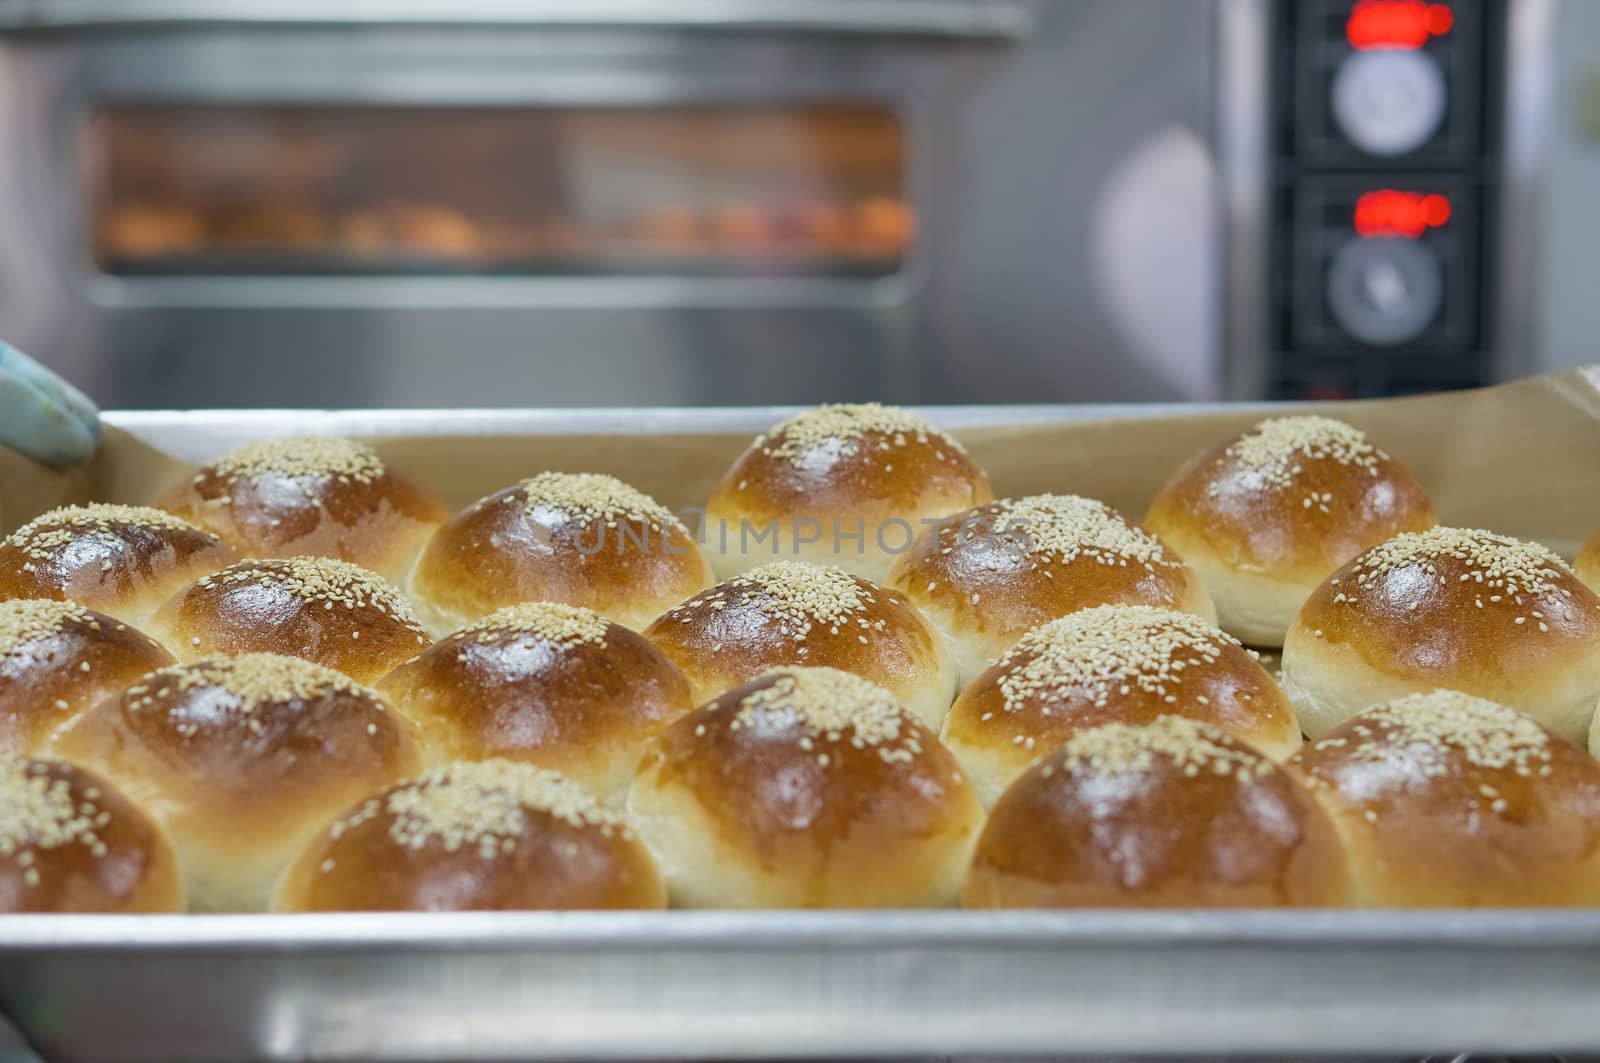 Dessert bread on top with sesame on stainless tray after baking in oven.